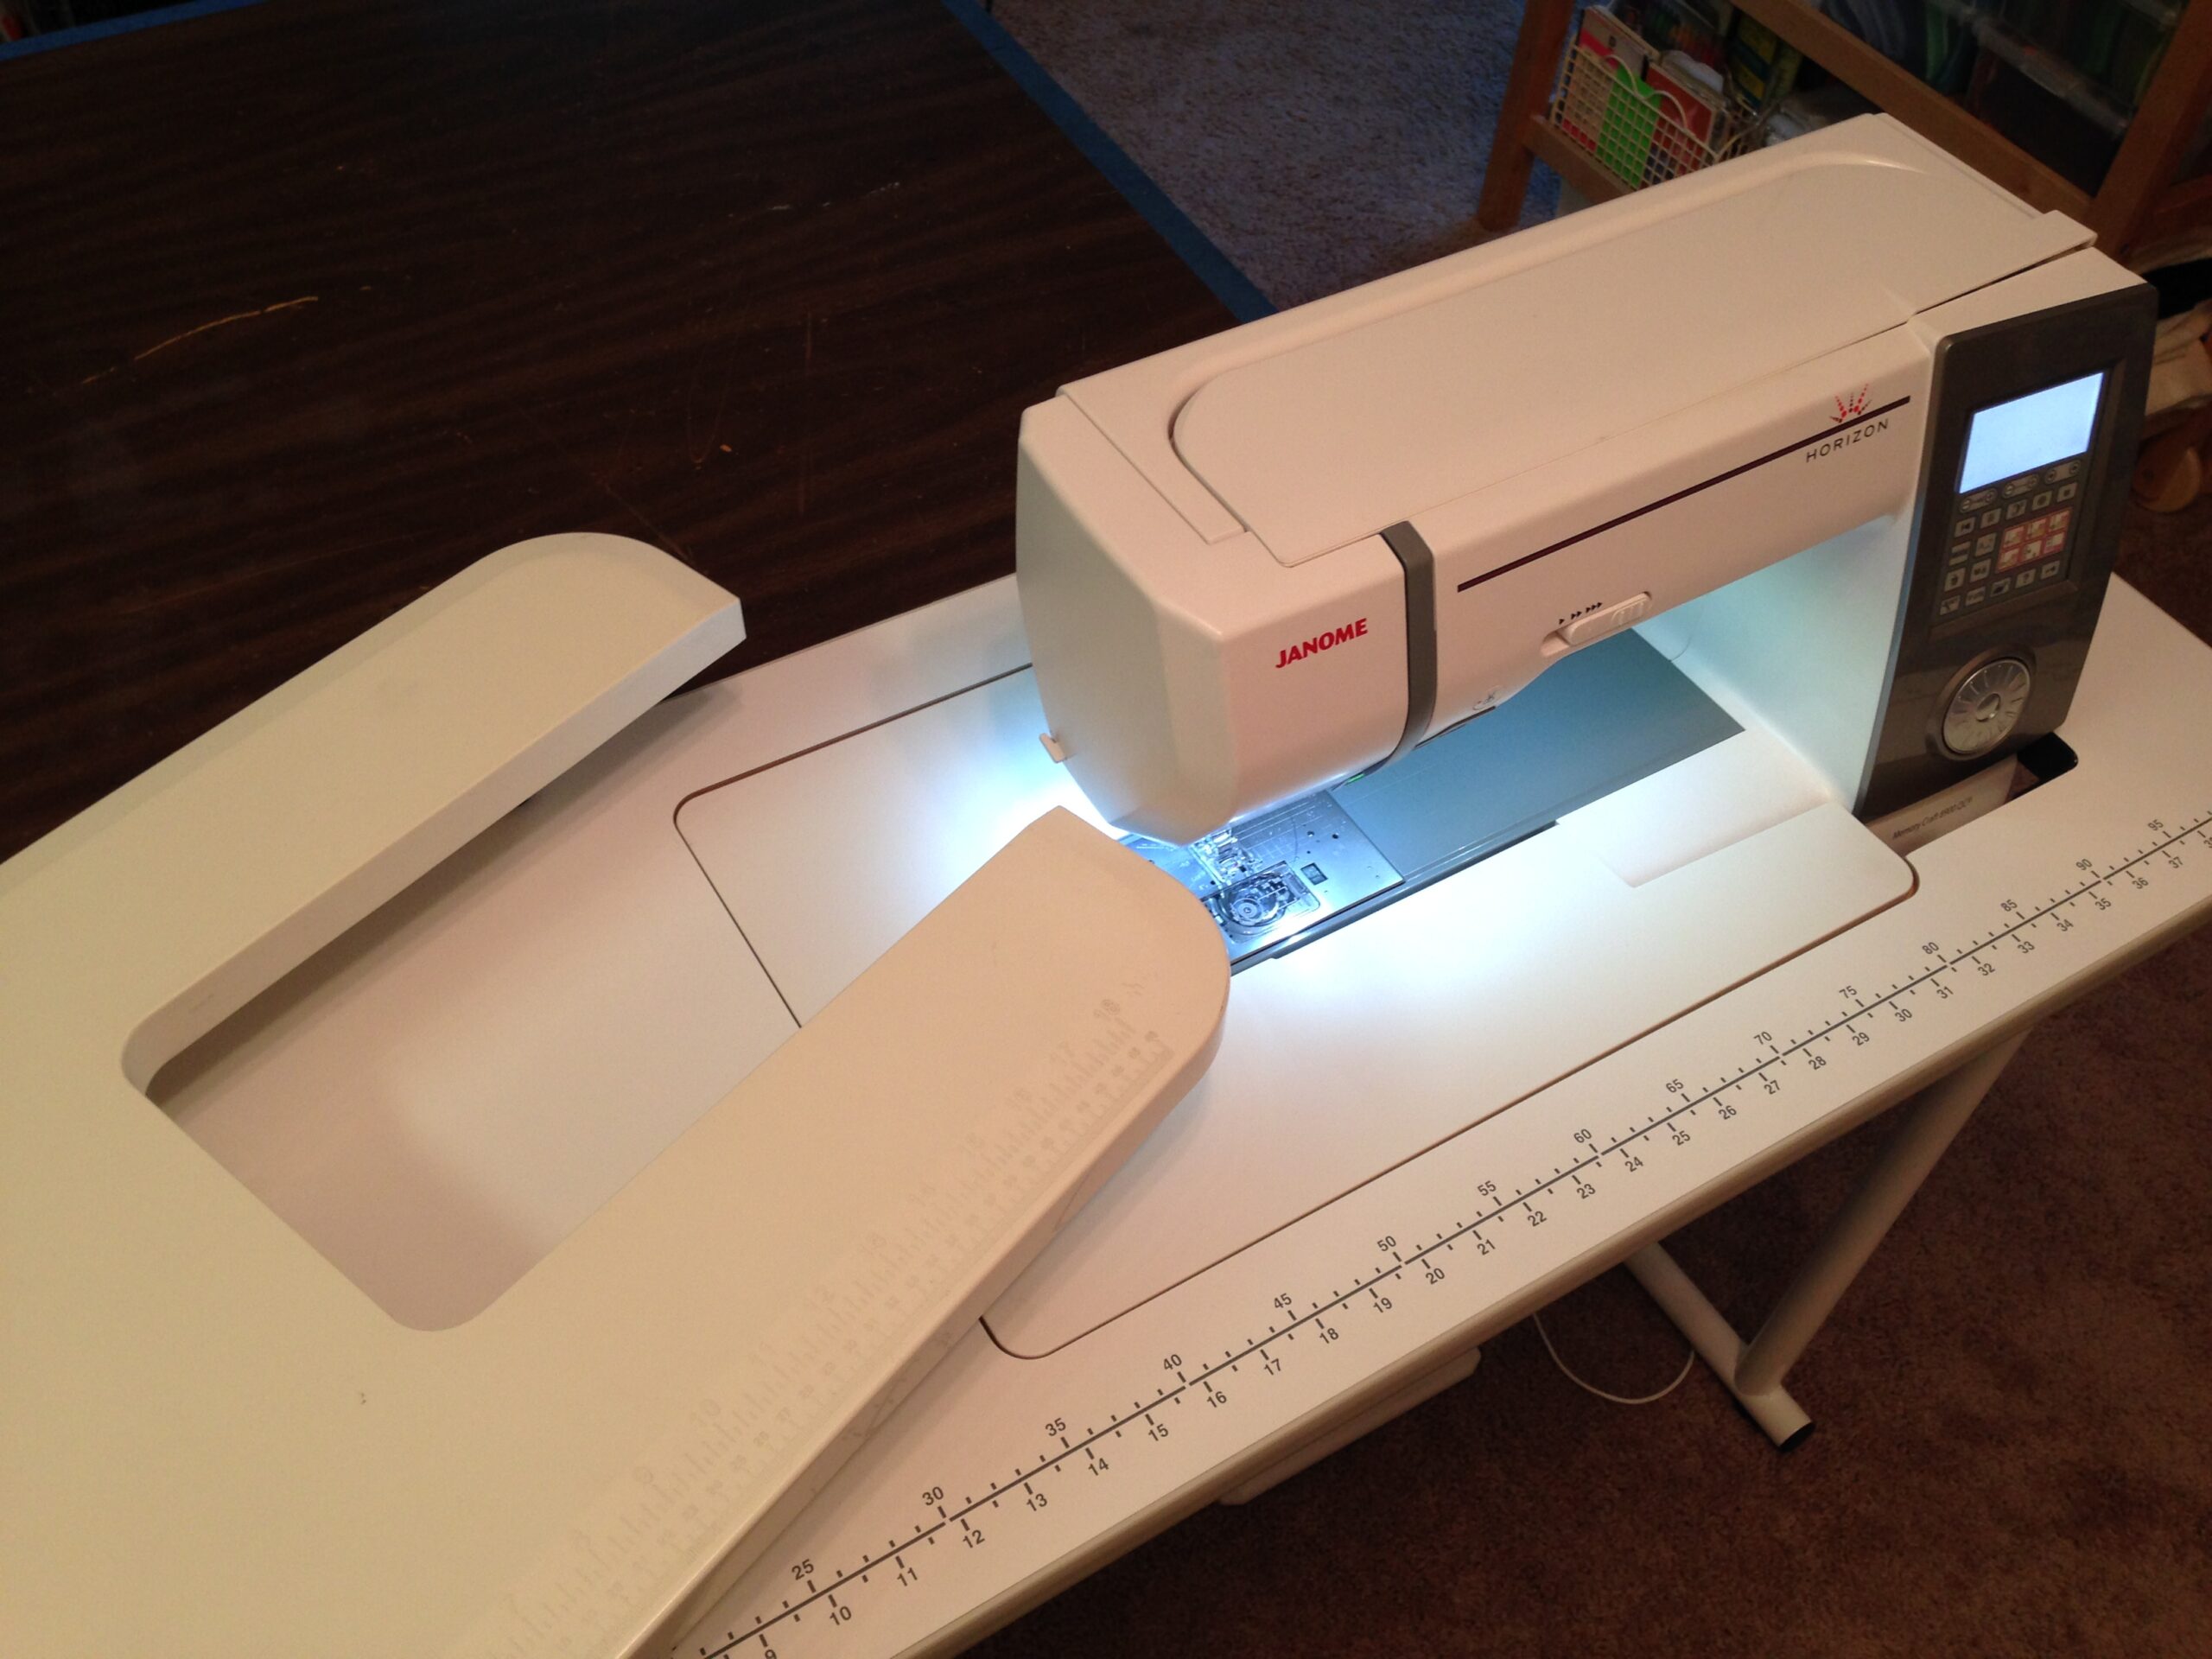 Studio Hack: Sewing machine put into a sewing table and extension table; both are helpful in extending your sewing space, making it easier to sew longer!